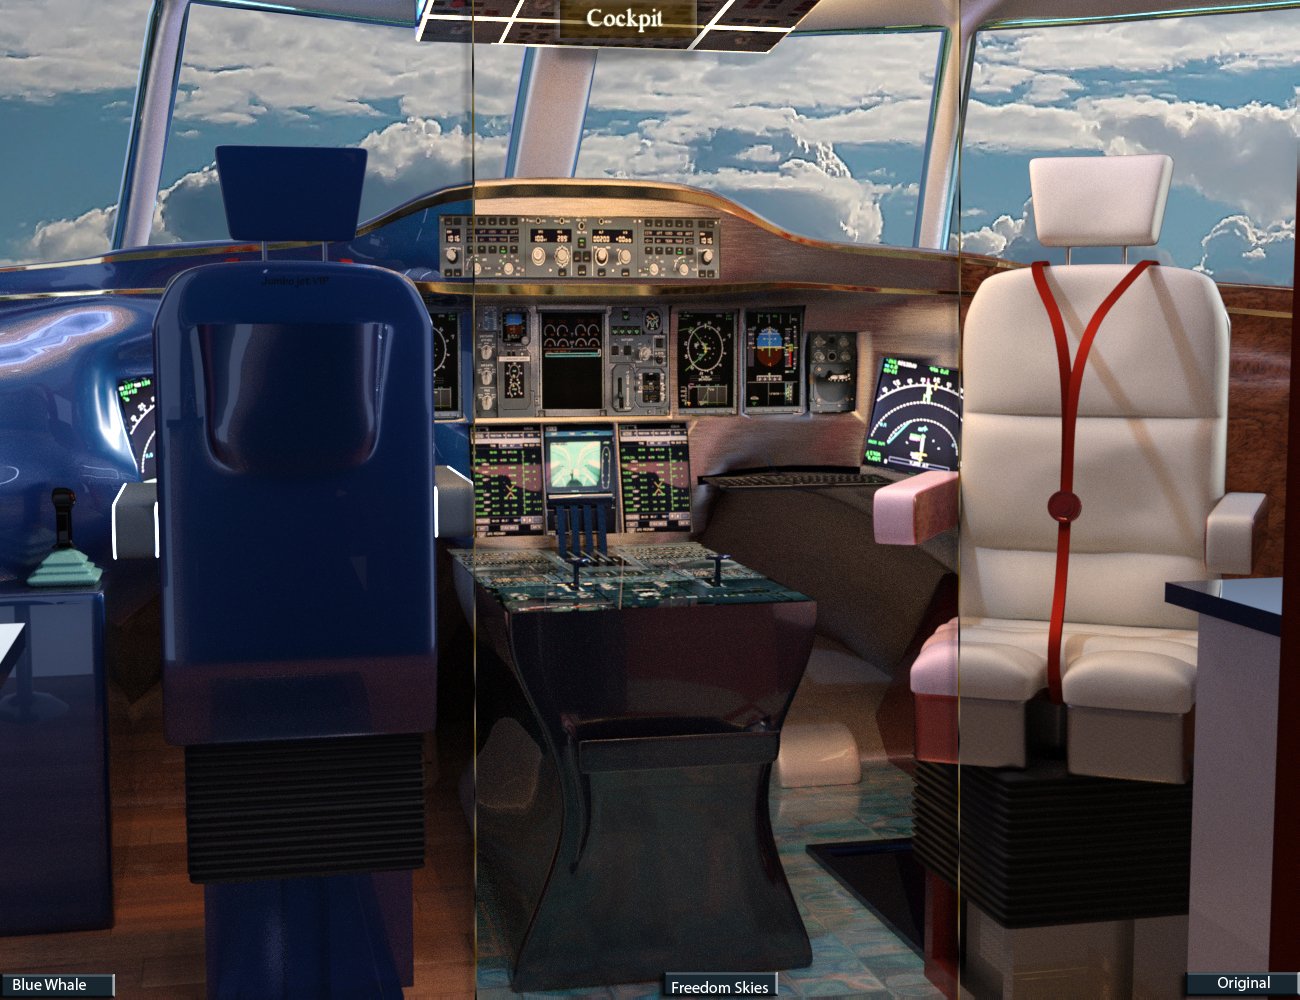 Jumbo Jet VIP Expanded for Iray by: PW Productions, 3D Models by Daz 3D